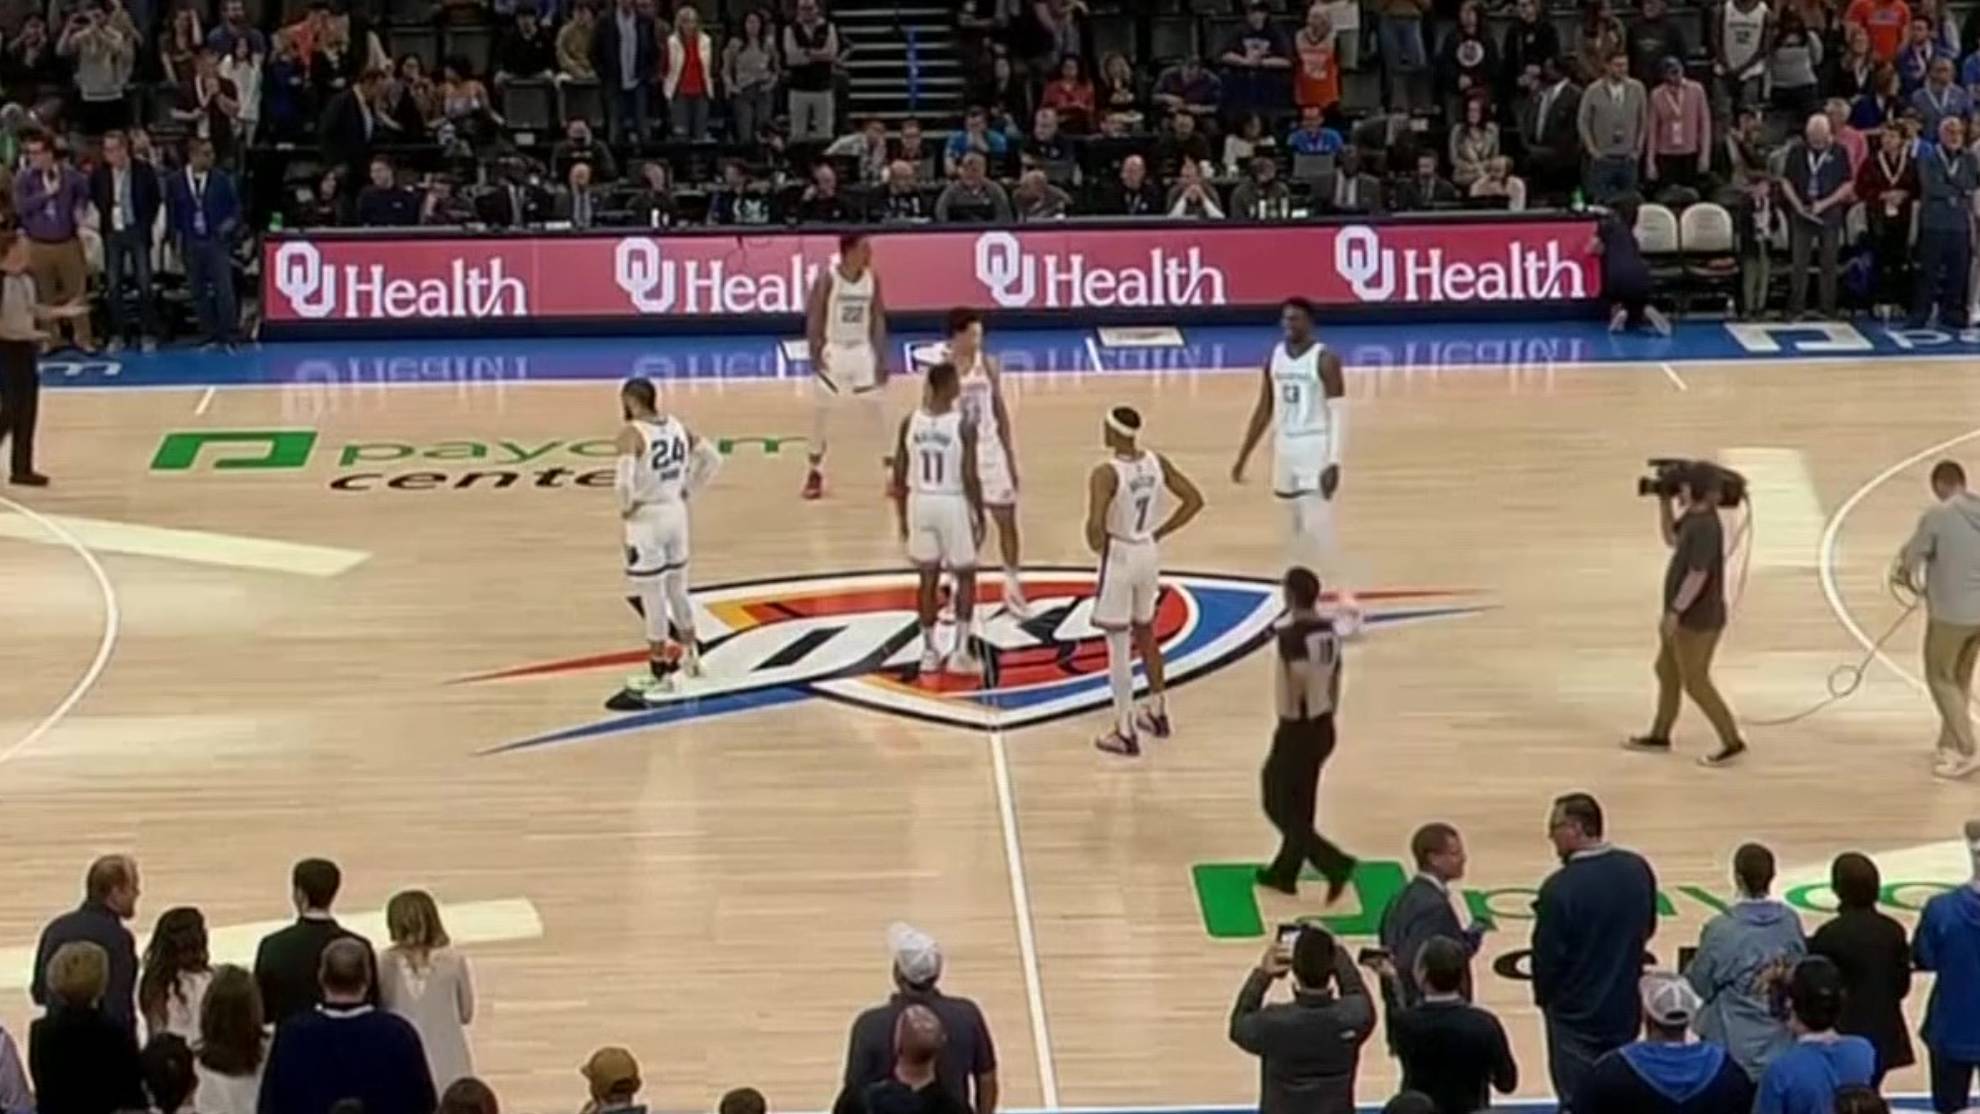 Surreal situation in NBA: Game delayed as both teams wear white uniforms for tip-off